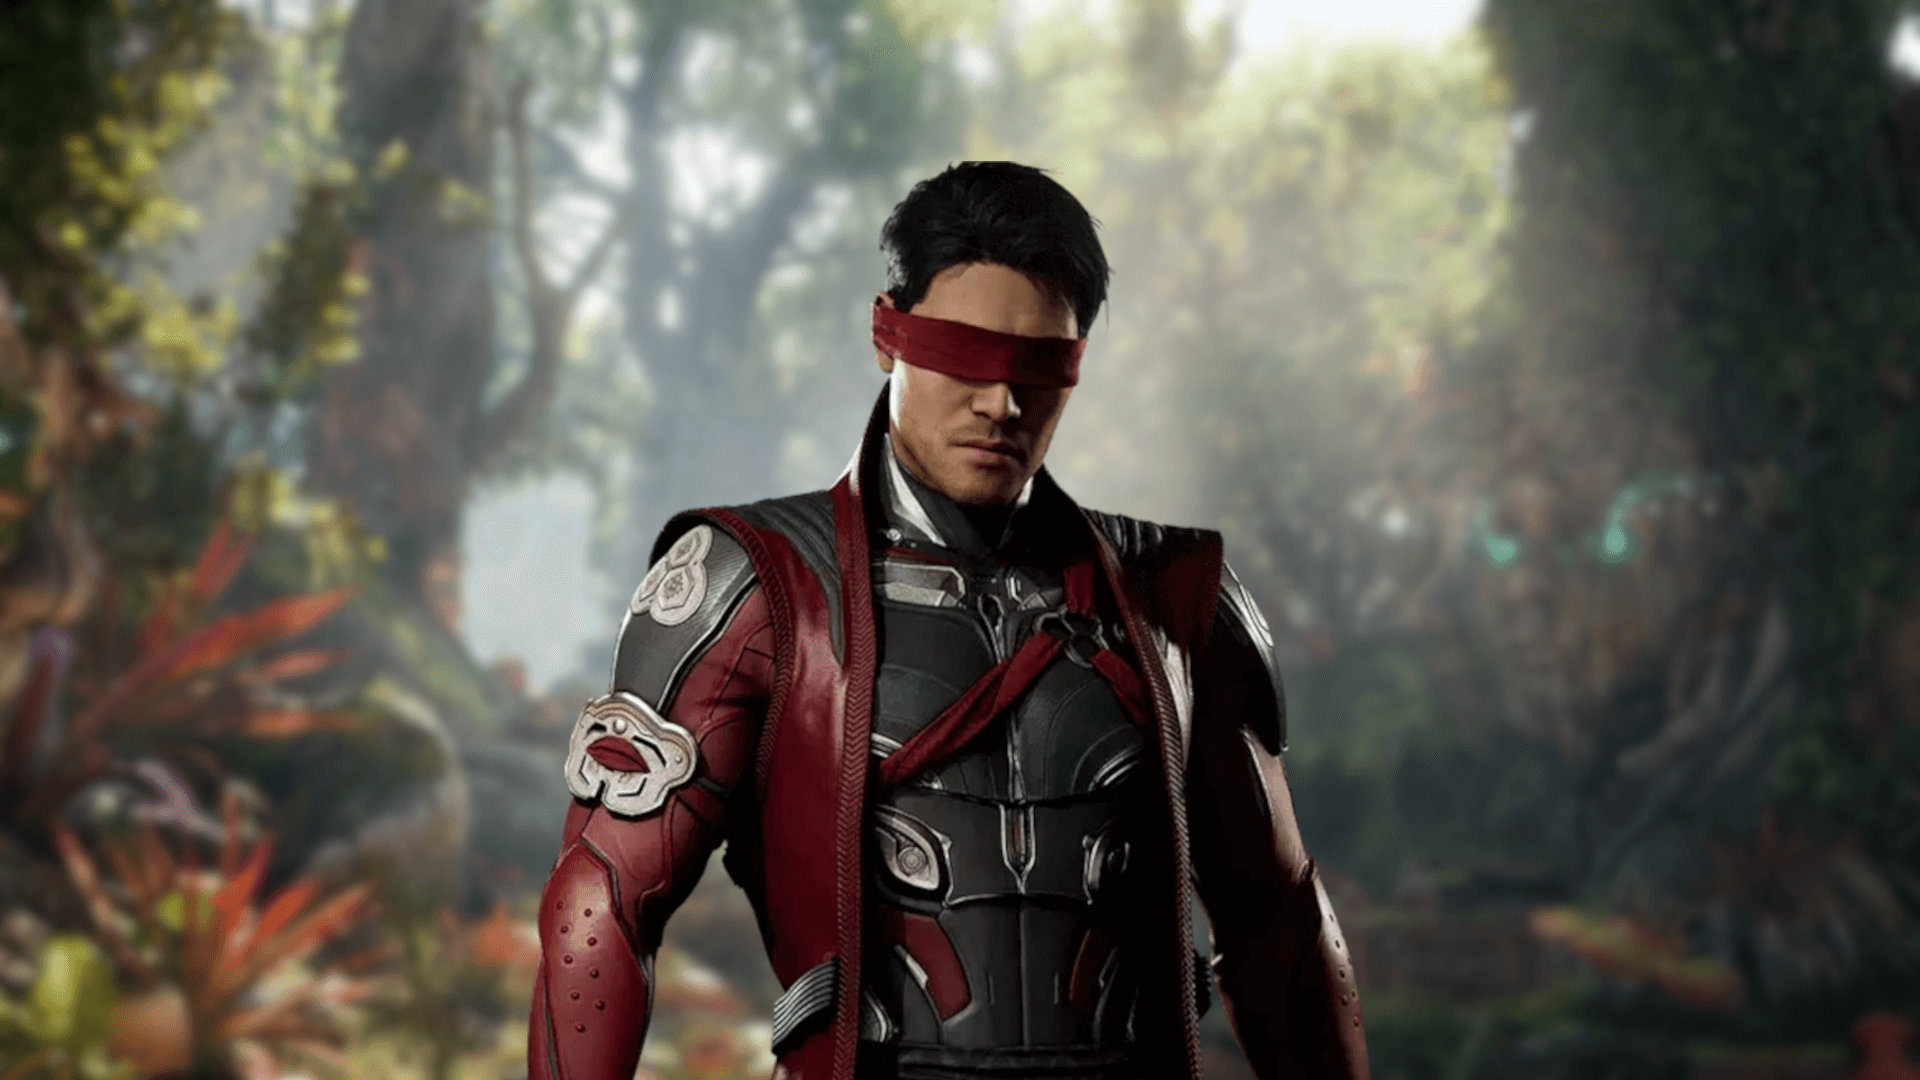 Mortal Kombat 1 Kenshi Character Guide: All You Need to Know